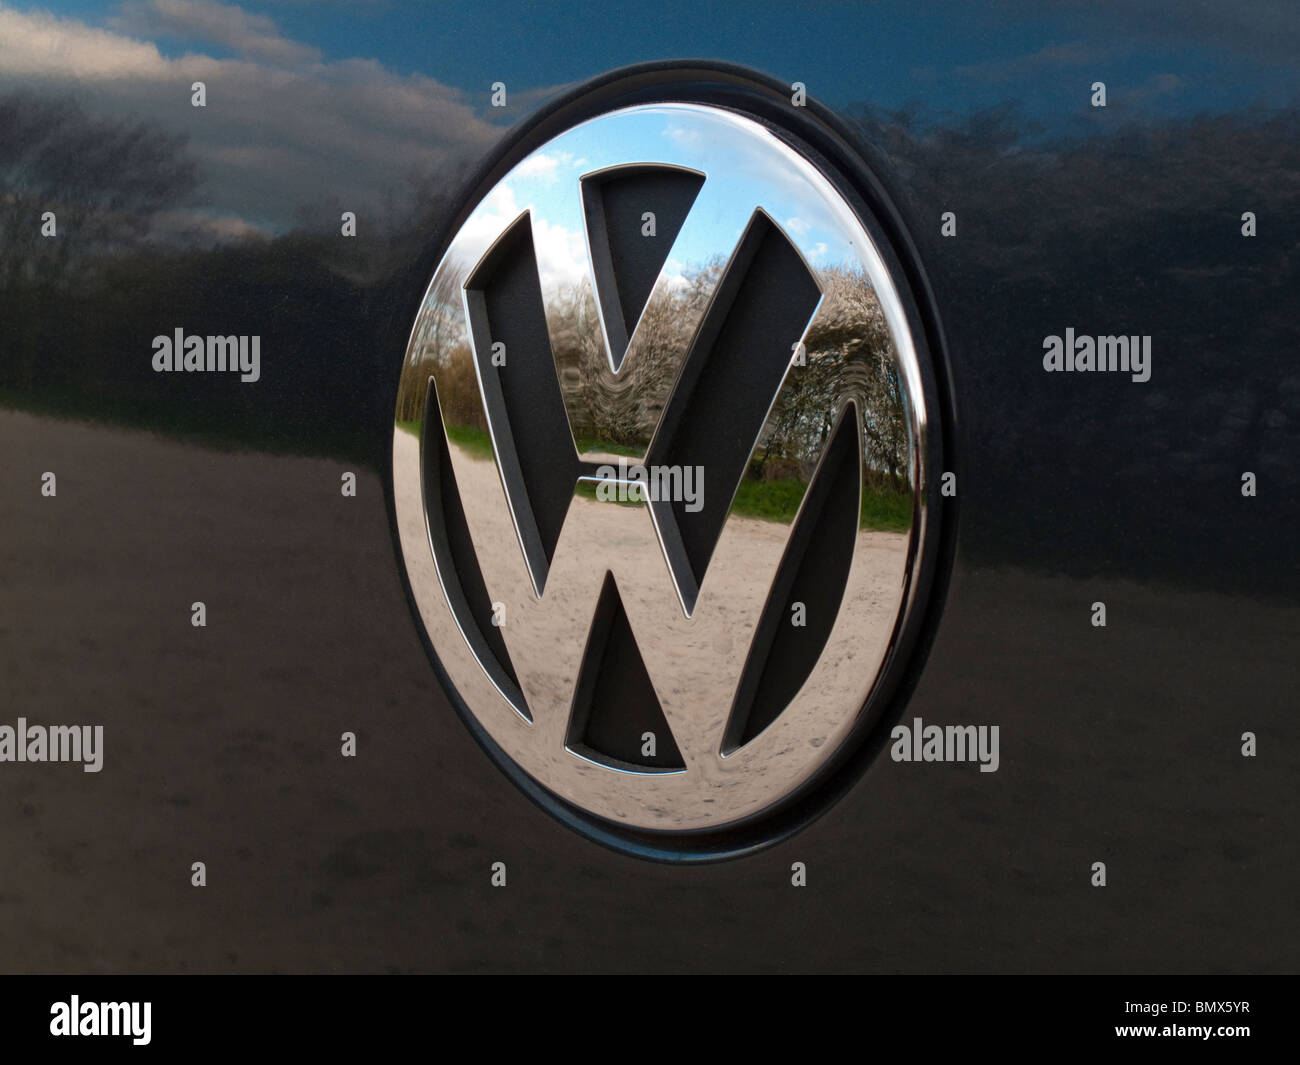 Close up view of a chrome Volkswagen VW logo on a car with reflections Stock Photo